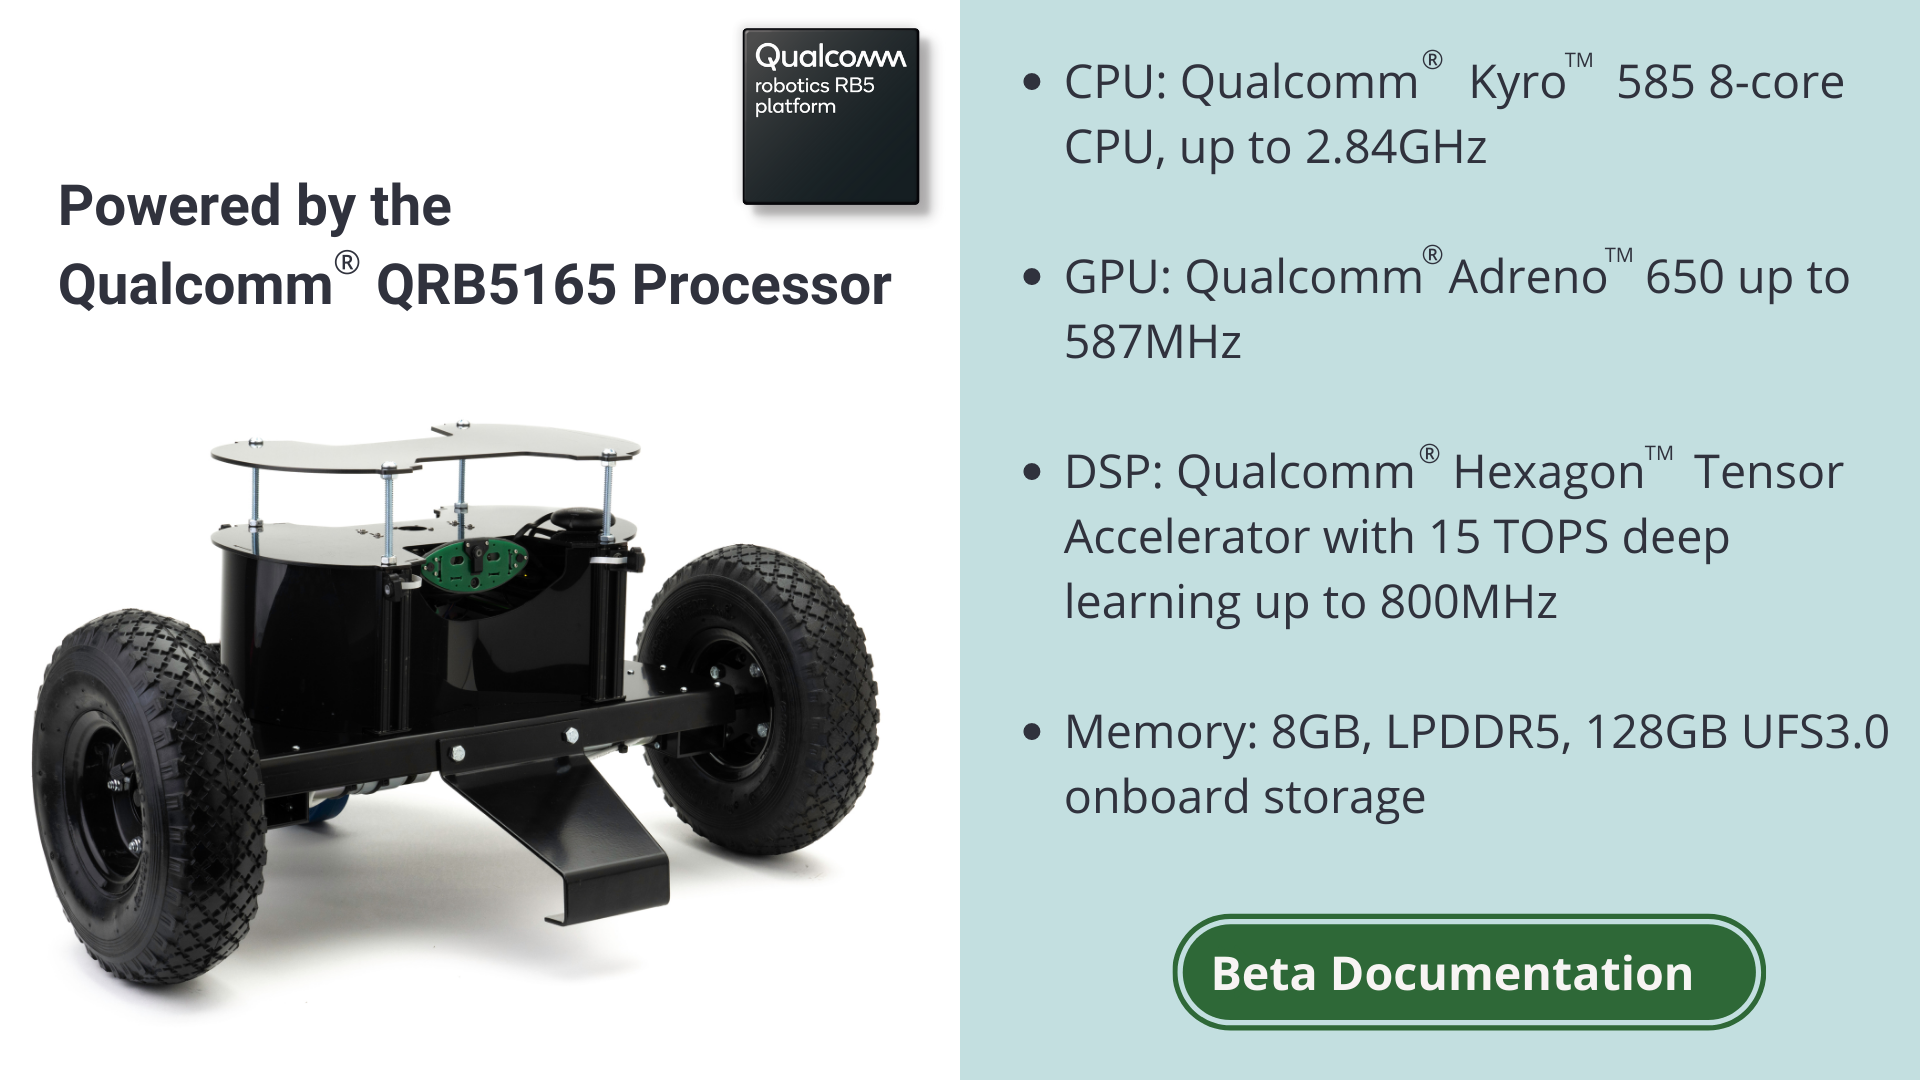 Powered by the Qualcomm QRB5165 Processor. CPU: Qualcomm Kyro 55 8 core CPU, up to 2.84GHz. GPU: Qualcomm Adreno 650 up to 587Mhz. DSP: Qualcomm Hexagon Tensor Accelerator with 15 TOPS deep learning up to 800MHz. Memory: 8GB, LPDDR5, 128GB UFS3.0 onboard storage